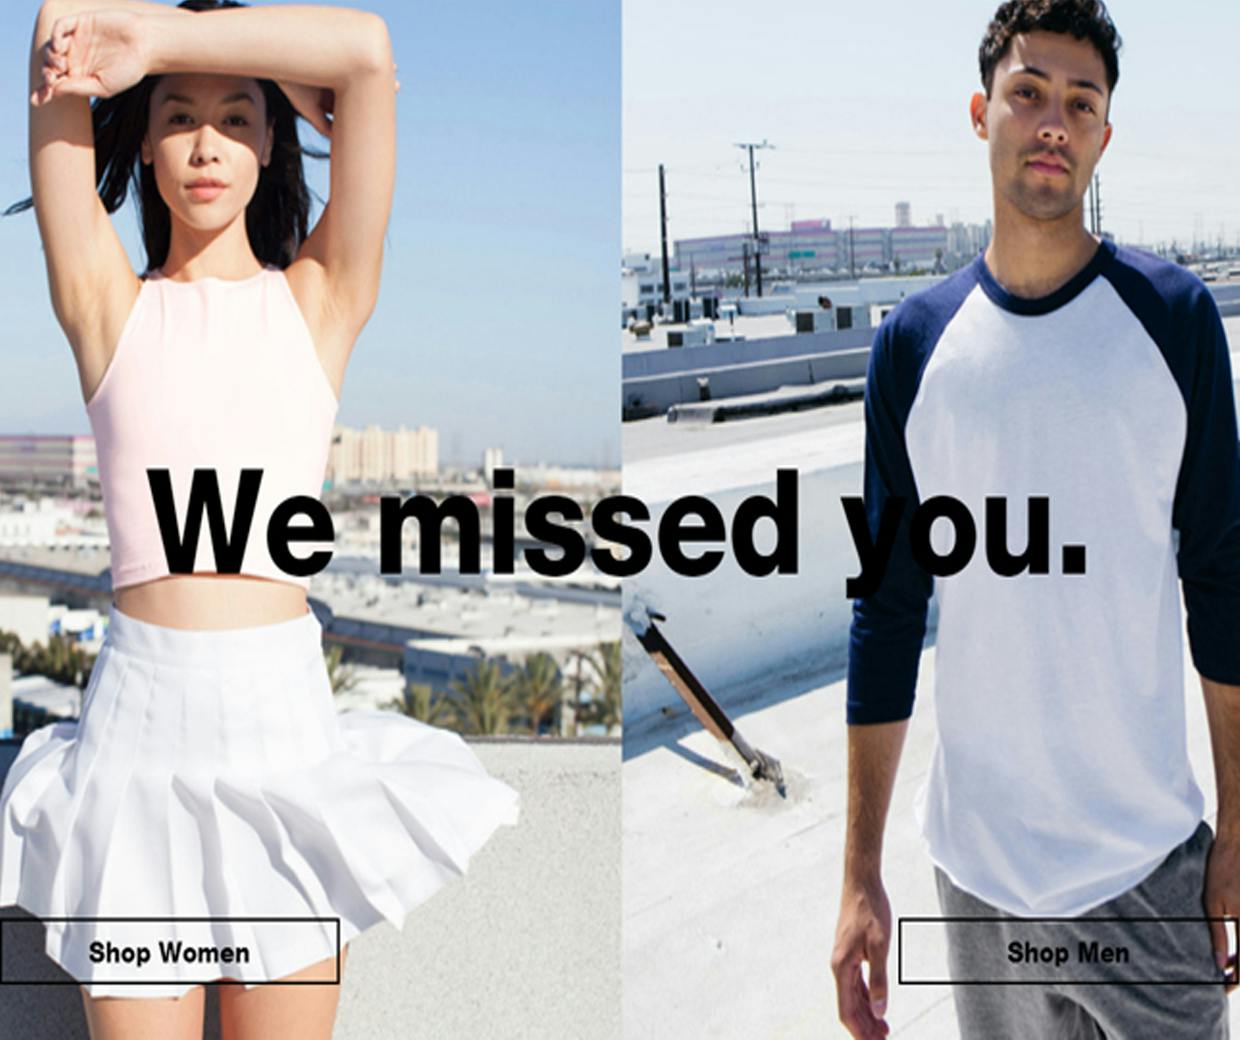 American Apparel Sexualized Ads - From provocative to body positive: The American Apparel comeback